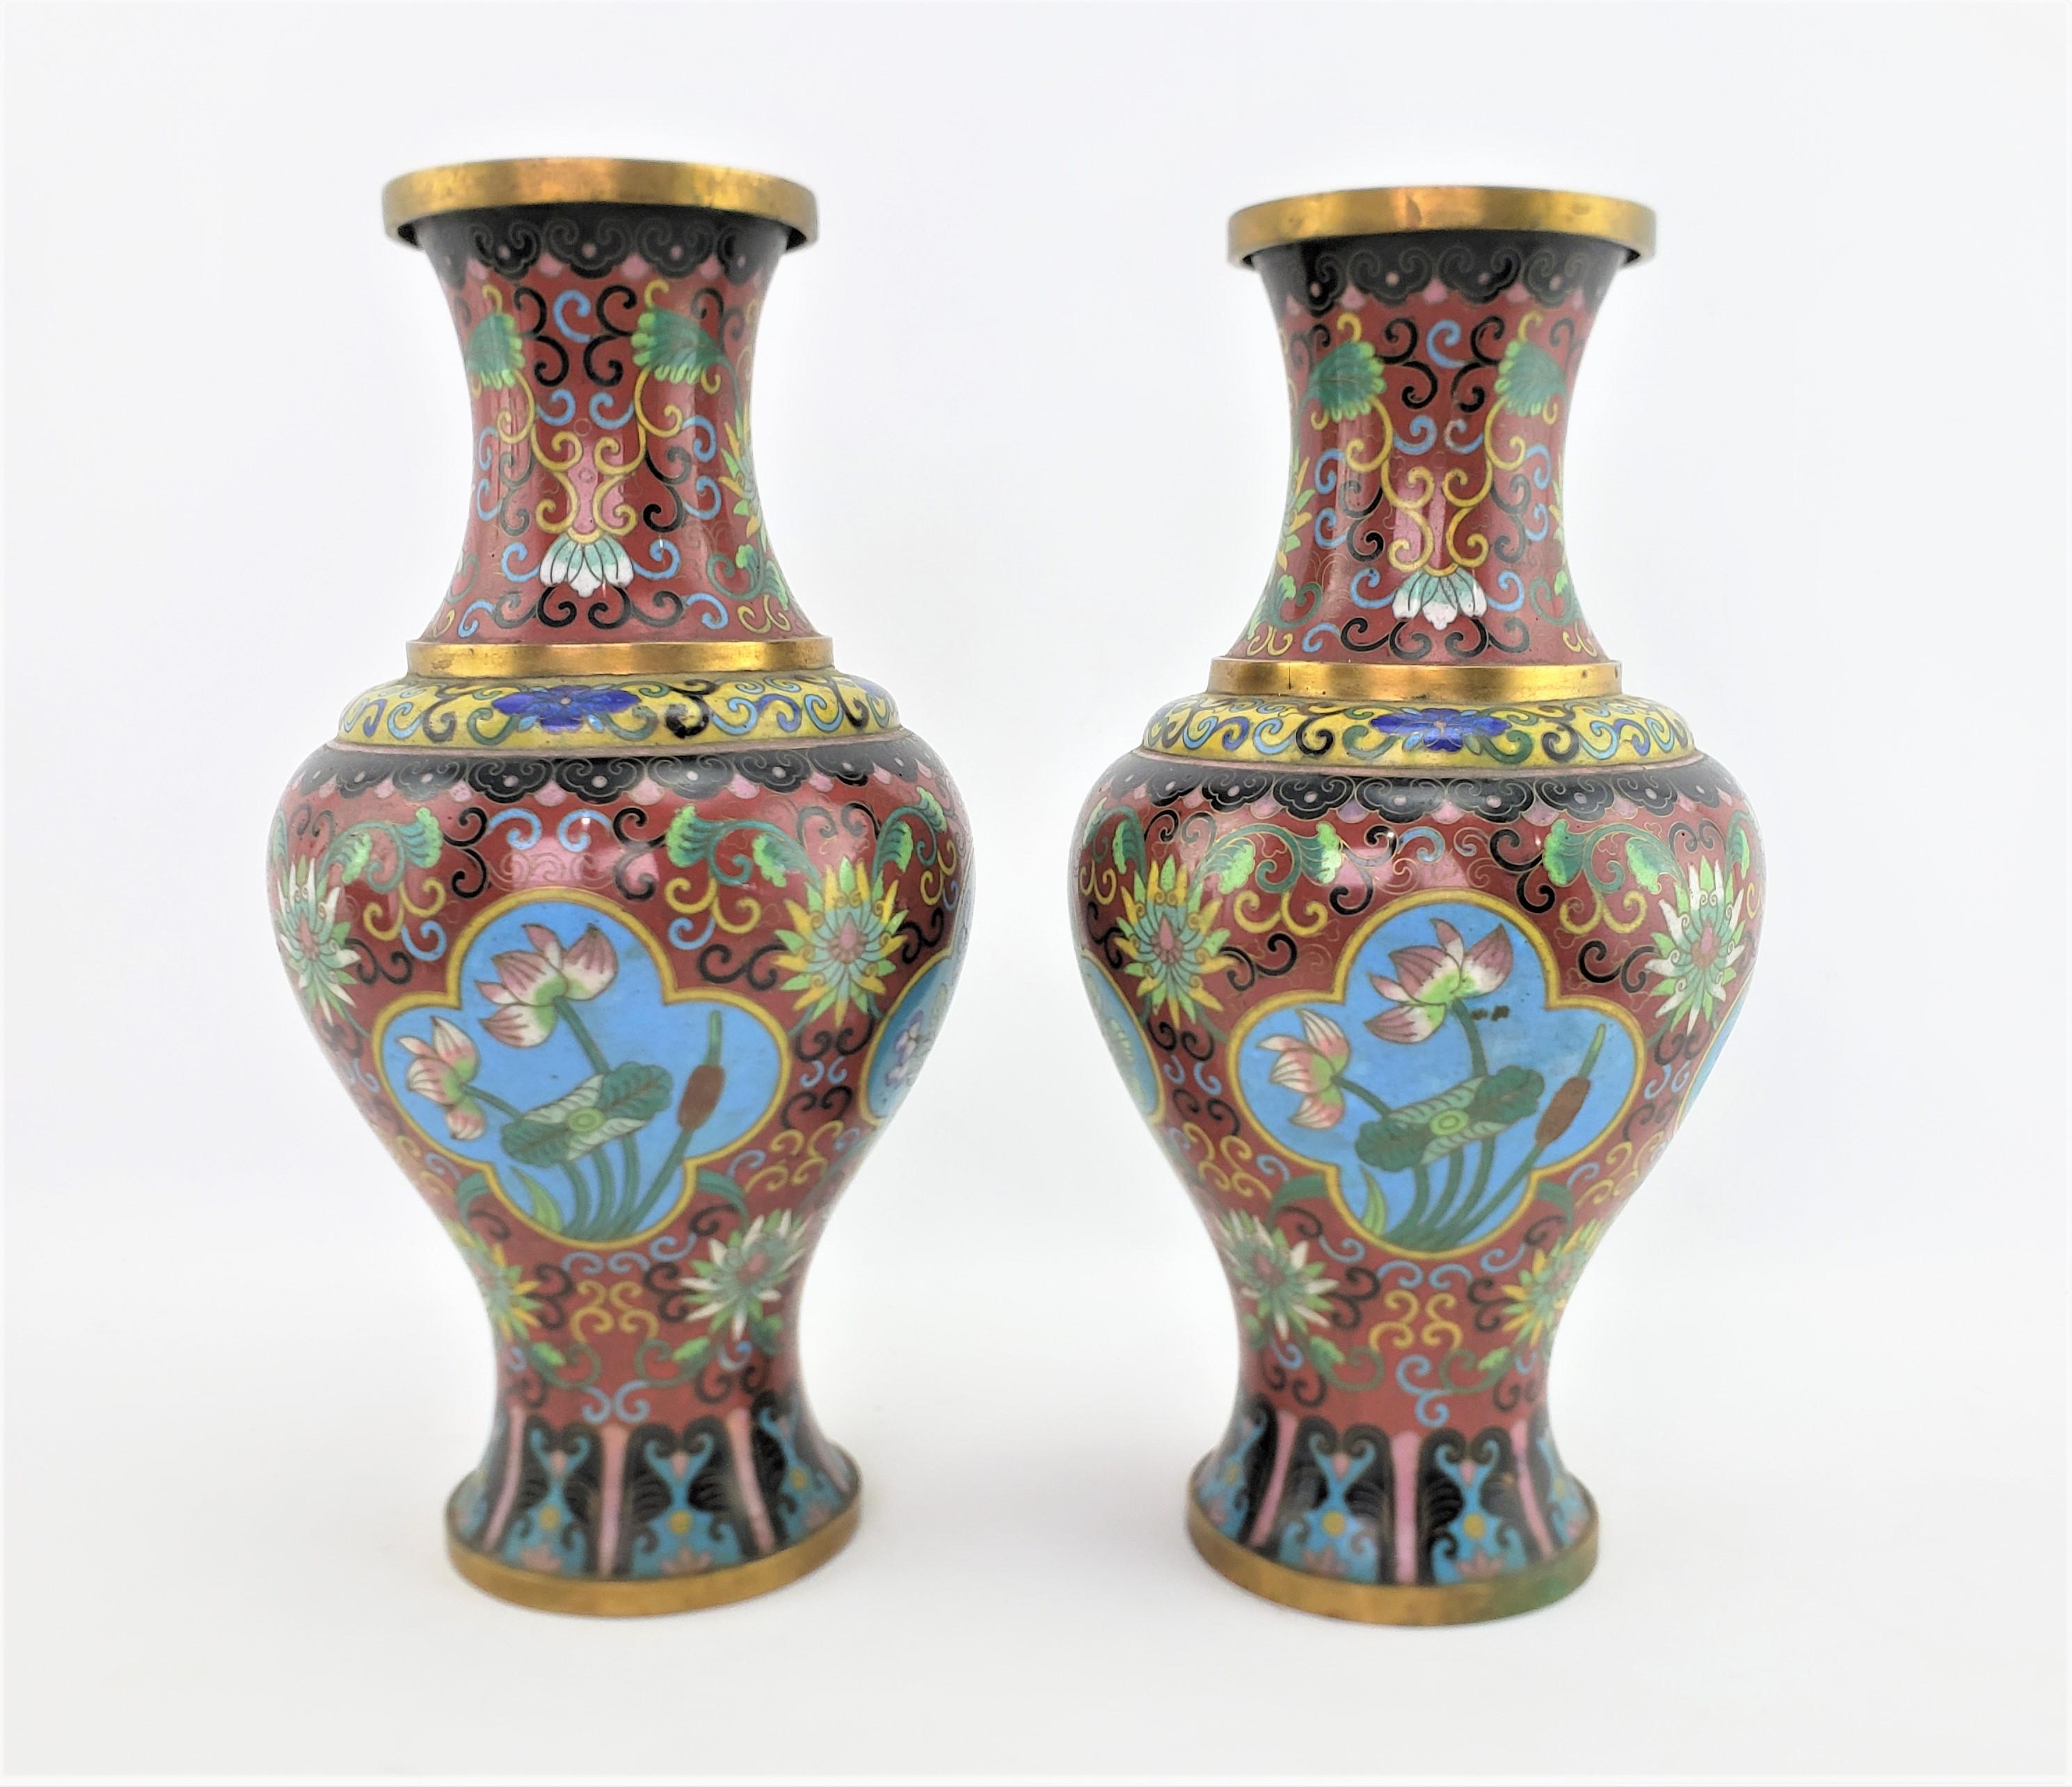 This pair of antique cloisonne vases originate from China during the Early Republic period and done in the Chinese Export style. These vases are done with a deep burgundy background with stylized and detailed floral panels of carnations and leaves